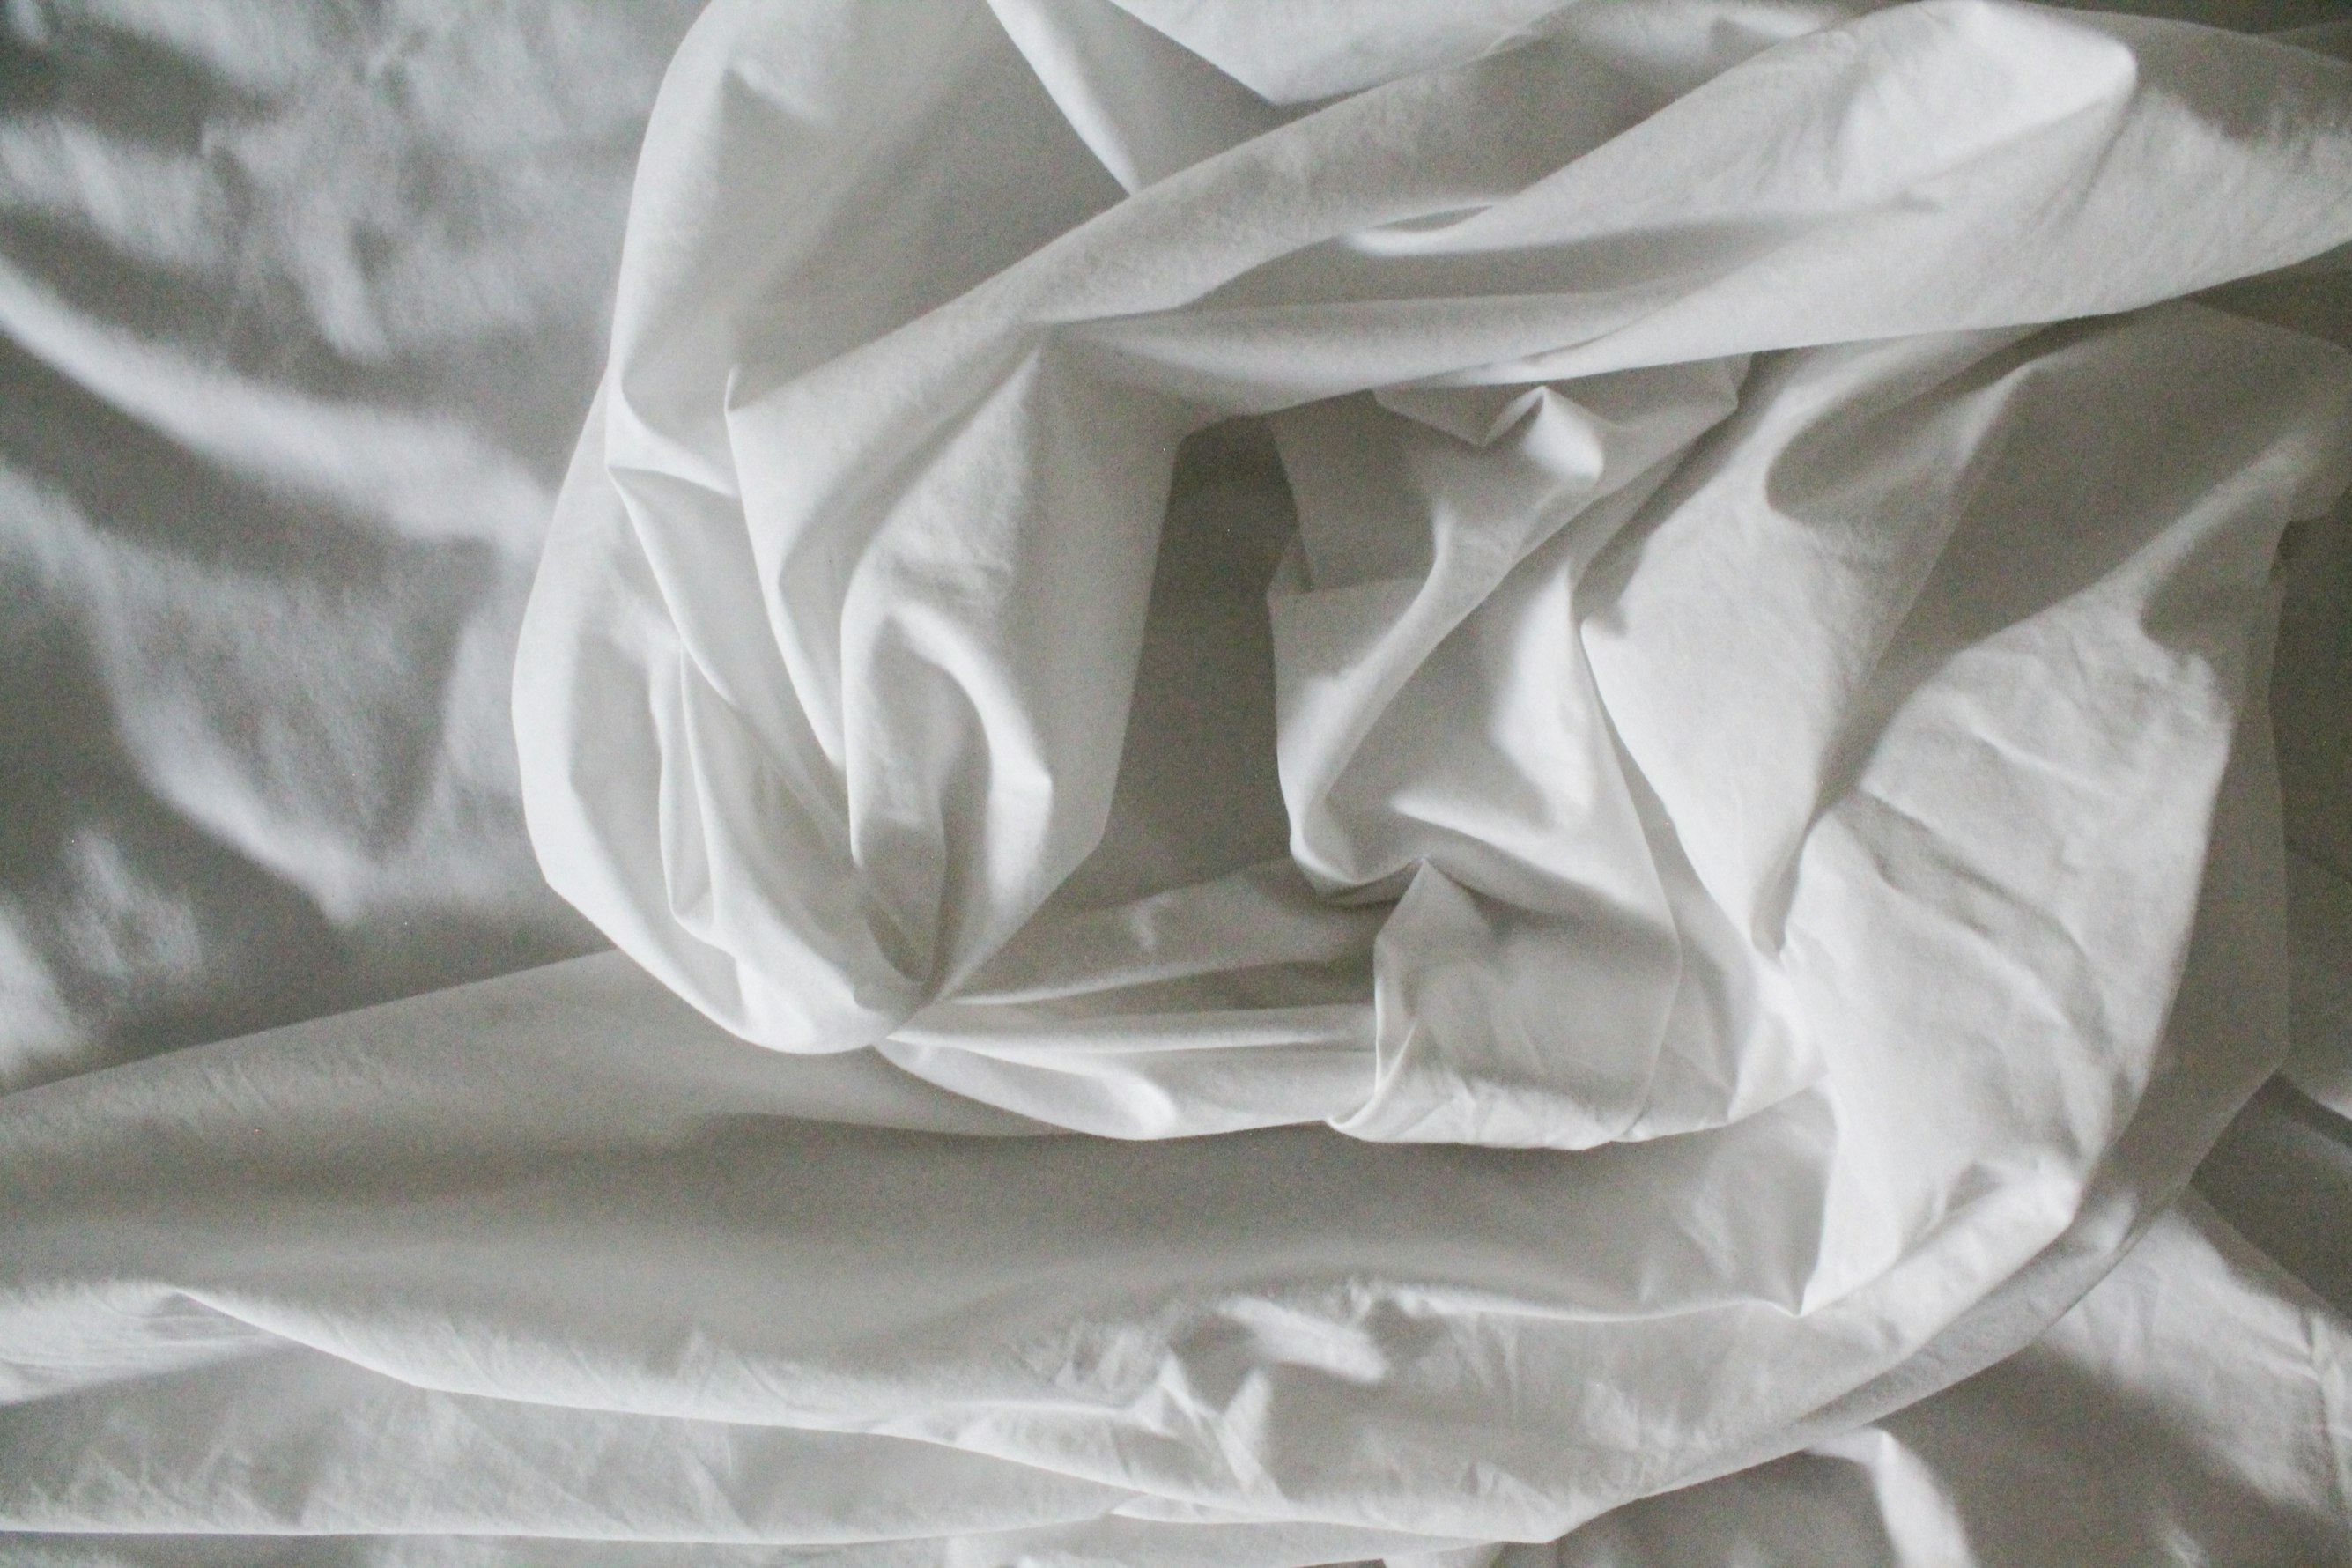 White sheets on bed - Photo by Justine Camacho on Unsplash